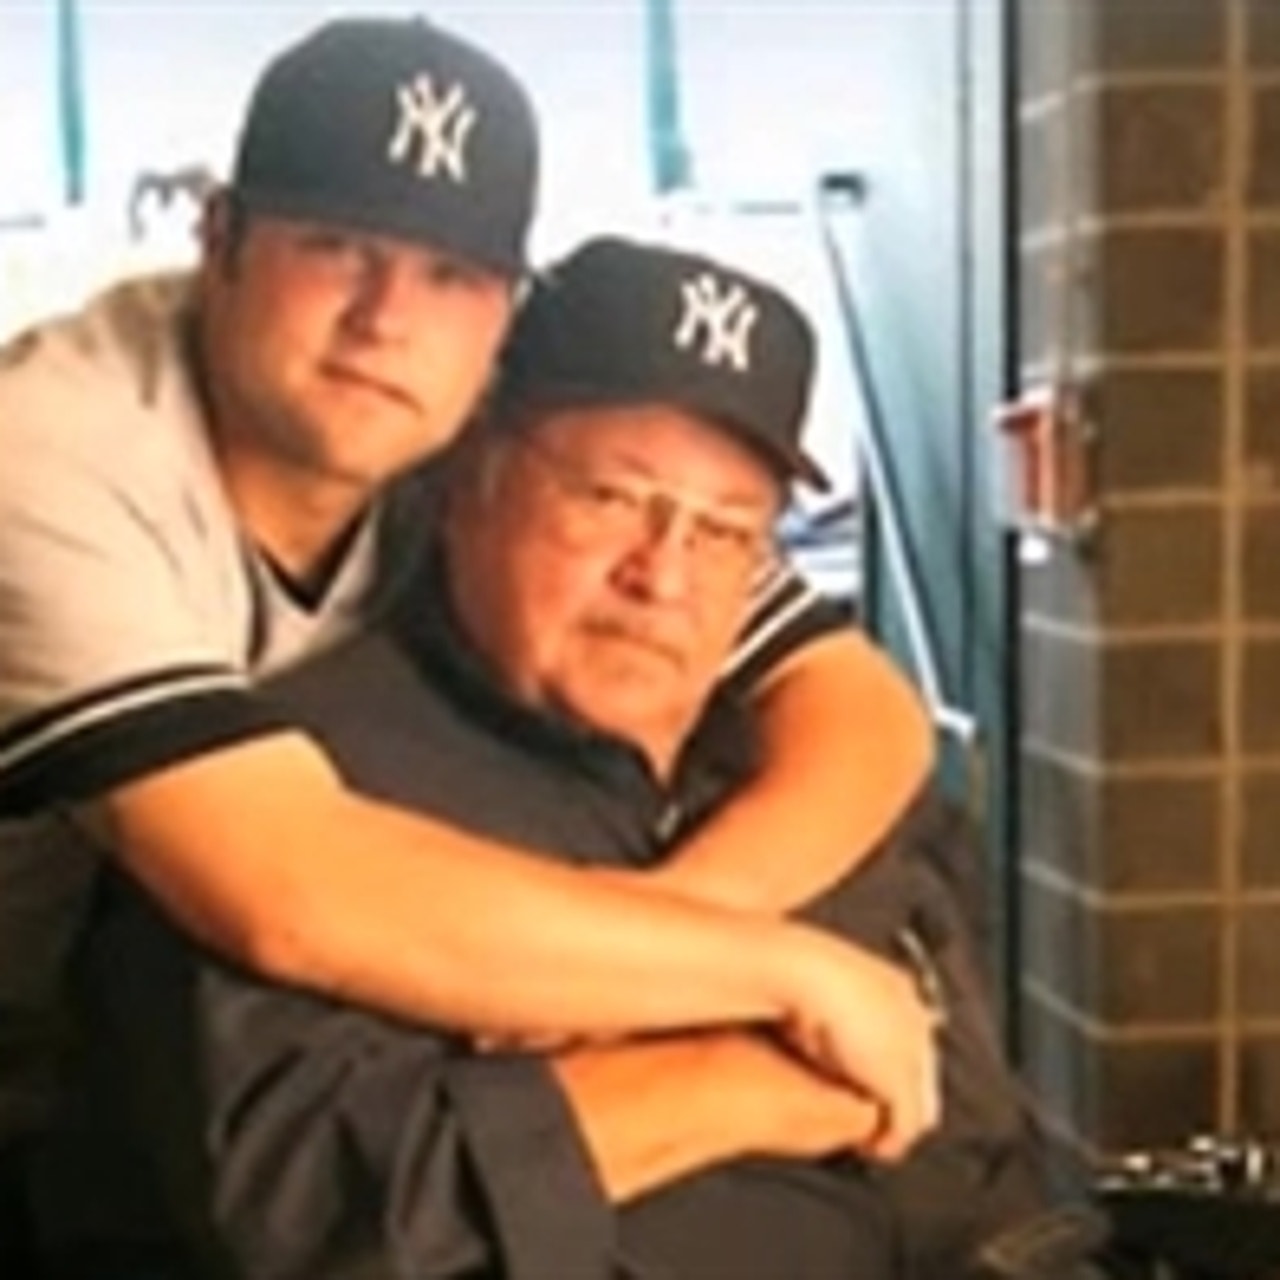 Joba Chamberlain lives Father's Day daily